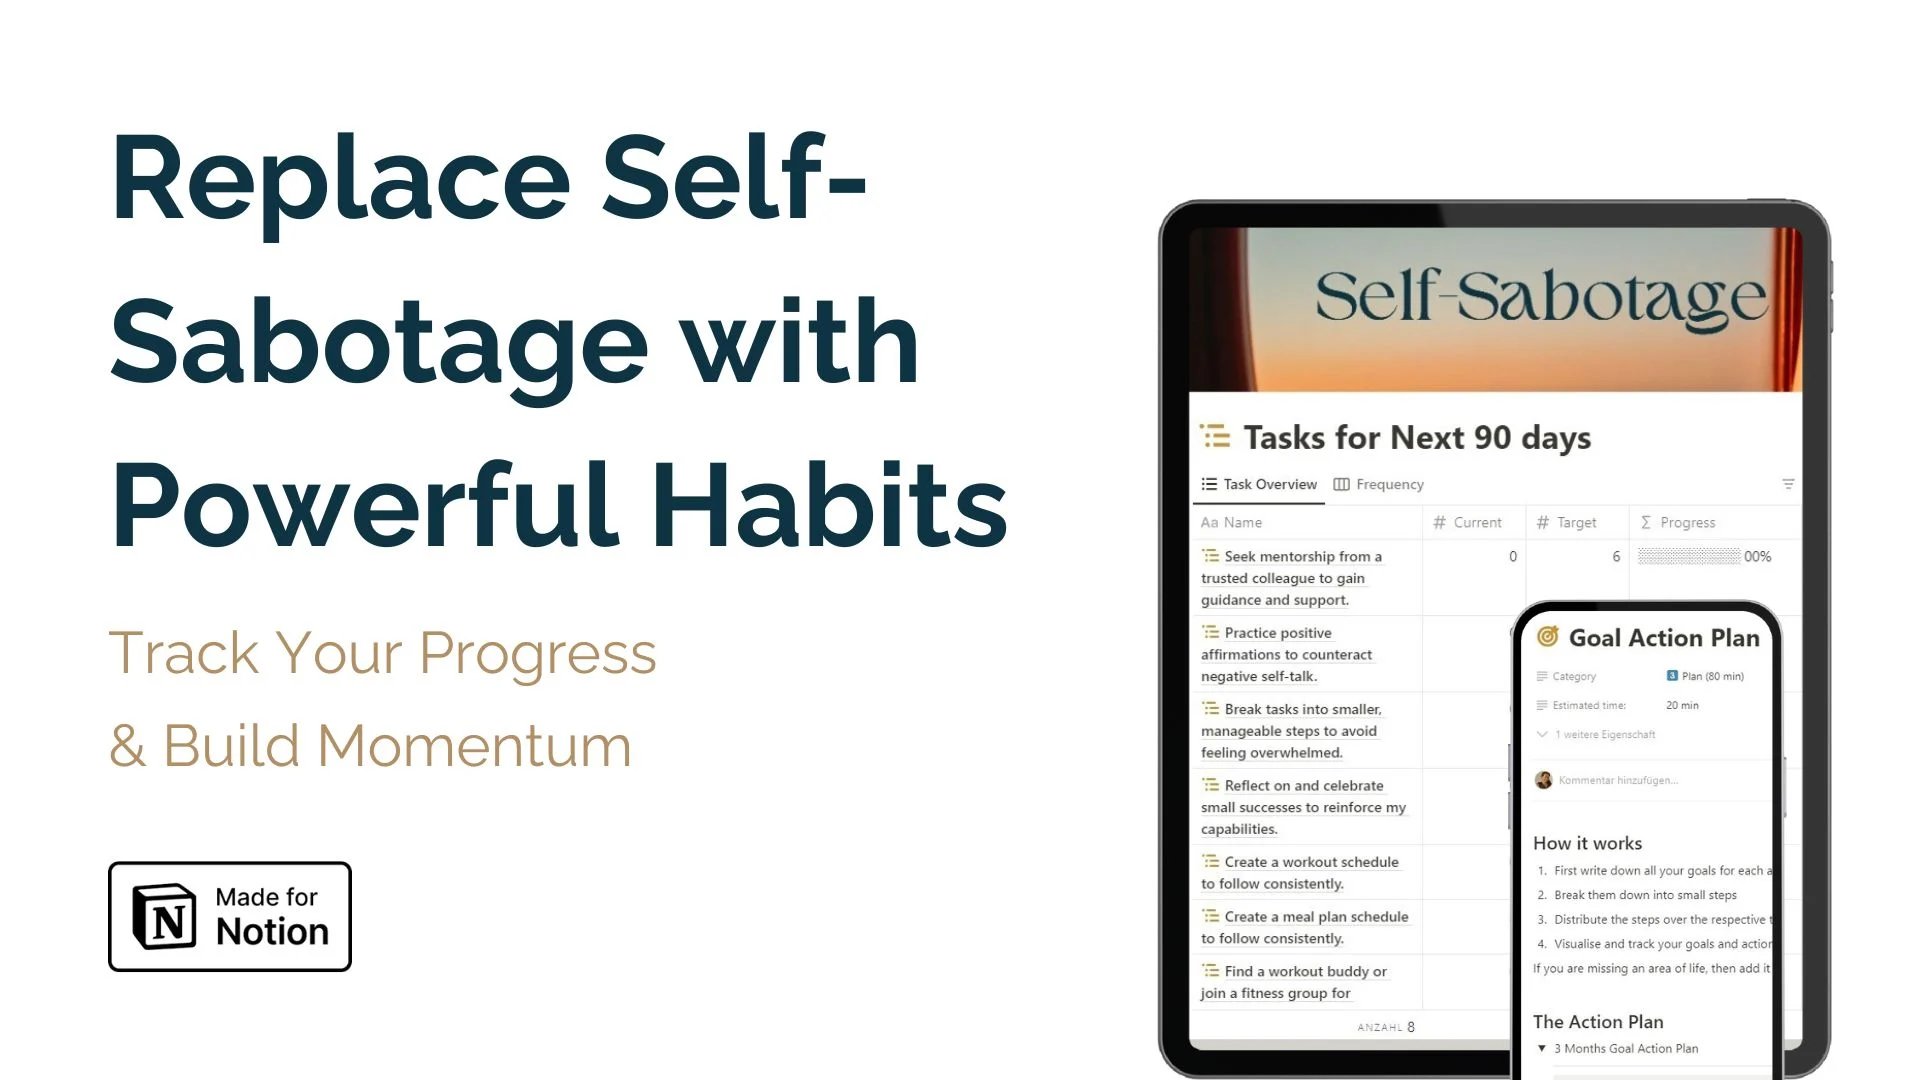 Stop Hitting Snooze on Your Dreams: All-in-one Notion Operating System to Fight Self Sabotage. The Self Sabotage OS is built to help you slay self-doubt and unleash your inner hero!